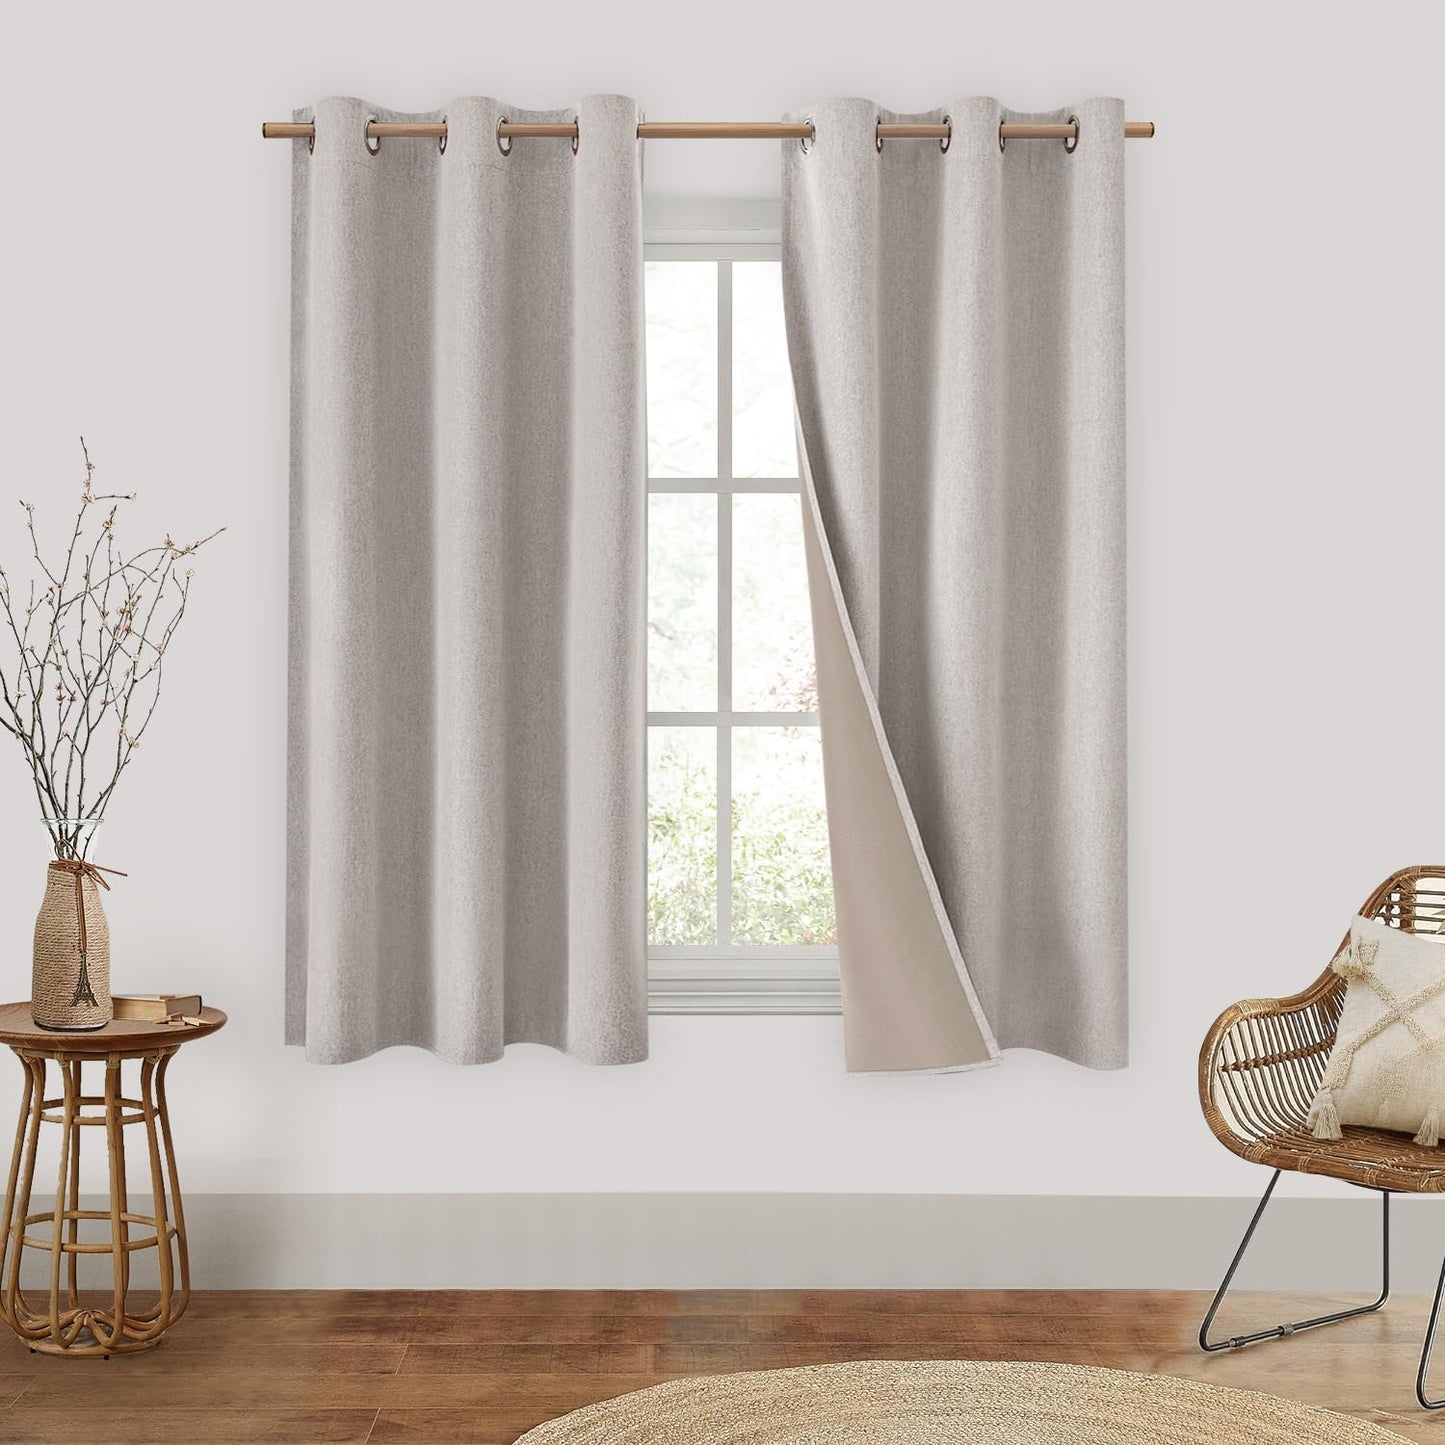 HOMEIDEAS 100% Blackout Linen Curtains for Bedroom 84 Inches Long 2 Panels Blush Pink Curtains Full Black Out Thermal Insulated Grommet Window Curtains/Drapes with Liner for Nursery  HOMEIDEAS Natural 42"W X 63"L 